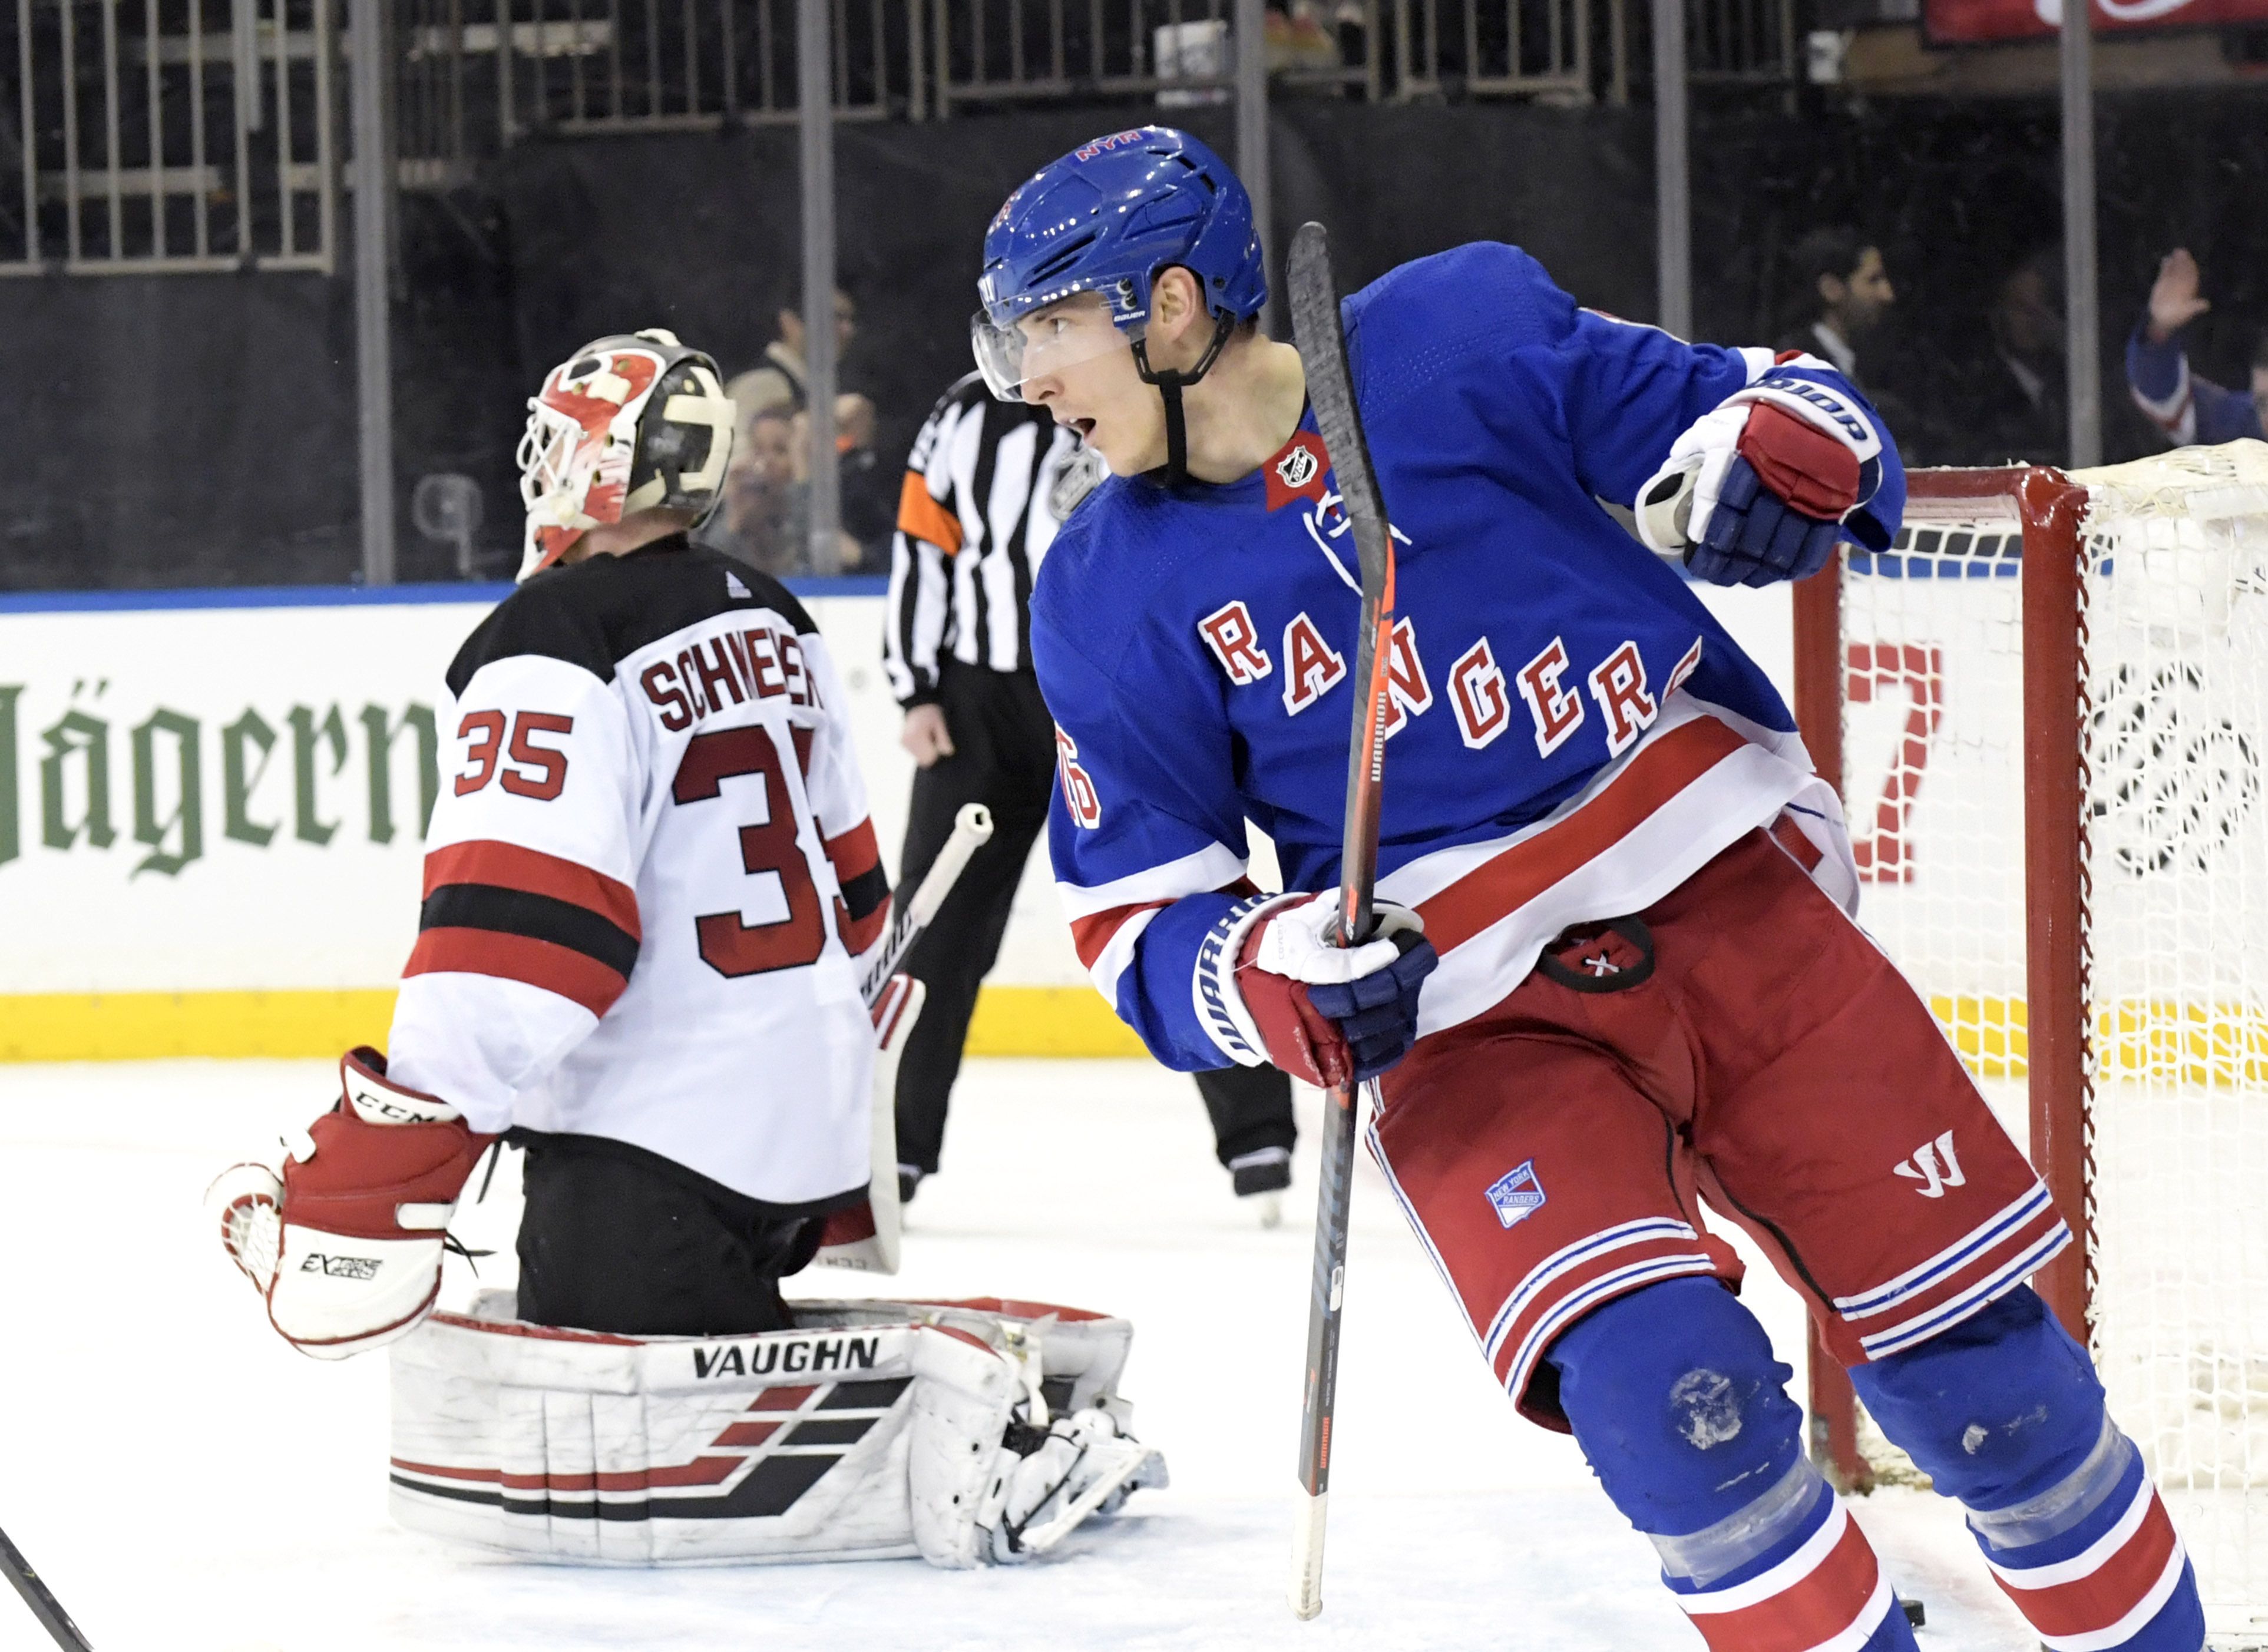 Rangers end 6-game slide with 4-2 win over Devils